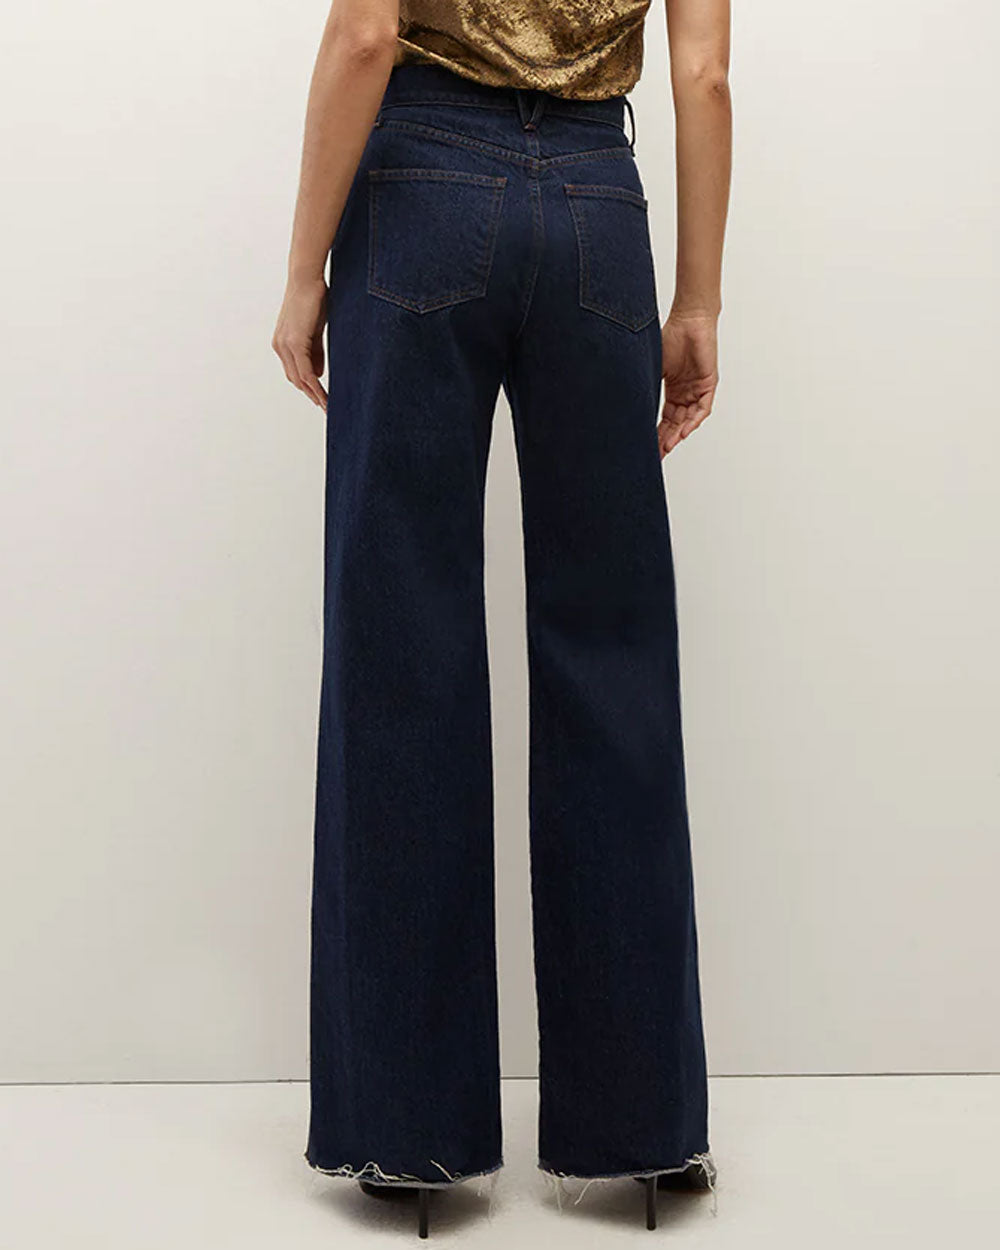 Taylor High Rise Wide Leg Jean in Rodeo